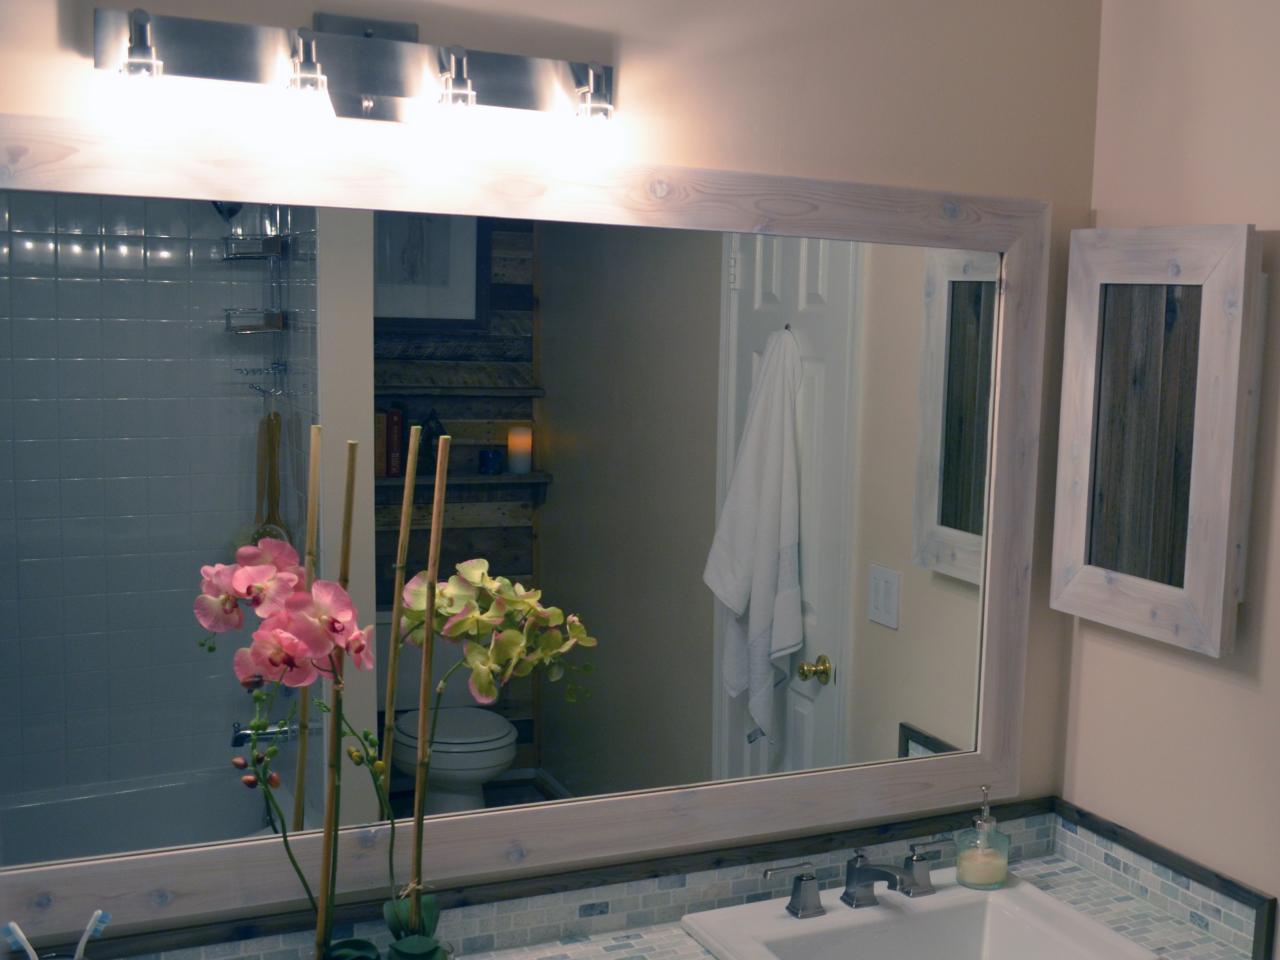 How To Replace A Bathroom Light Fixture, How To Remove A Vanity Light Fixture